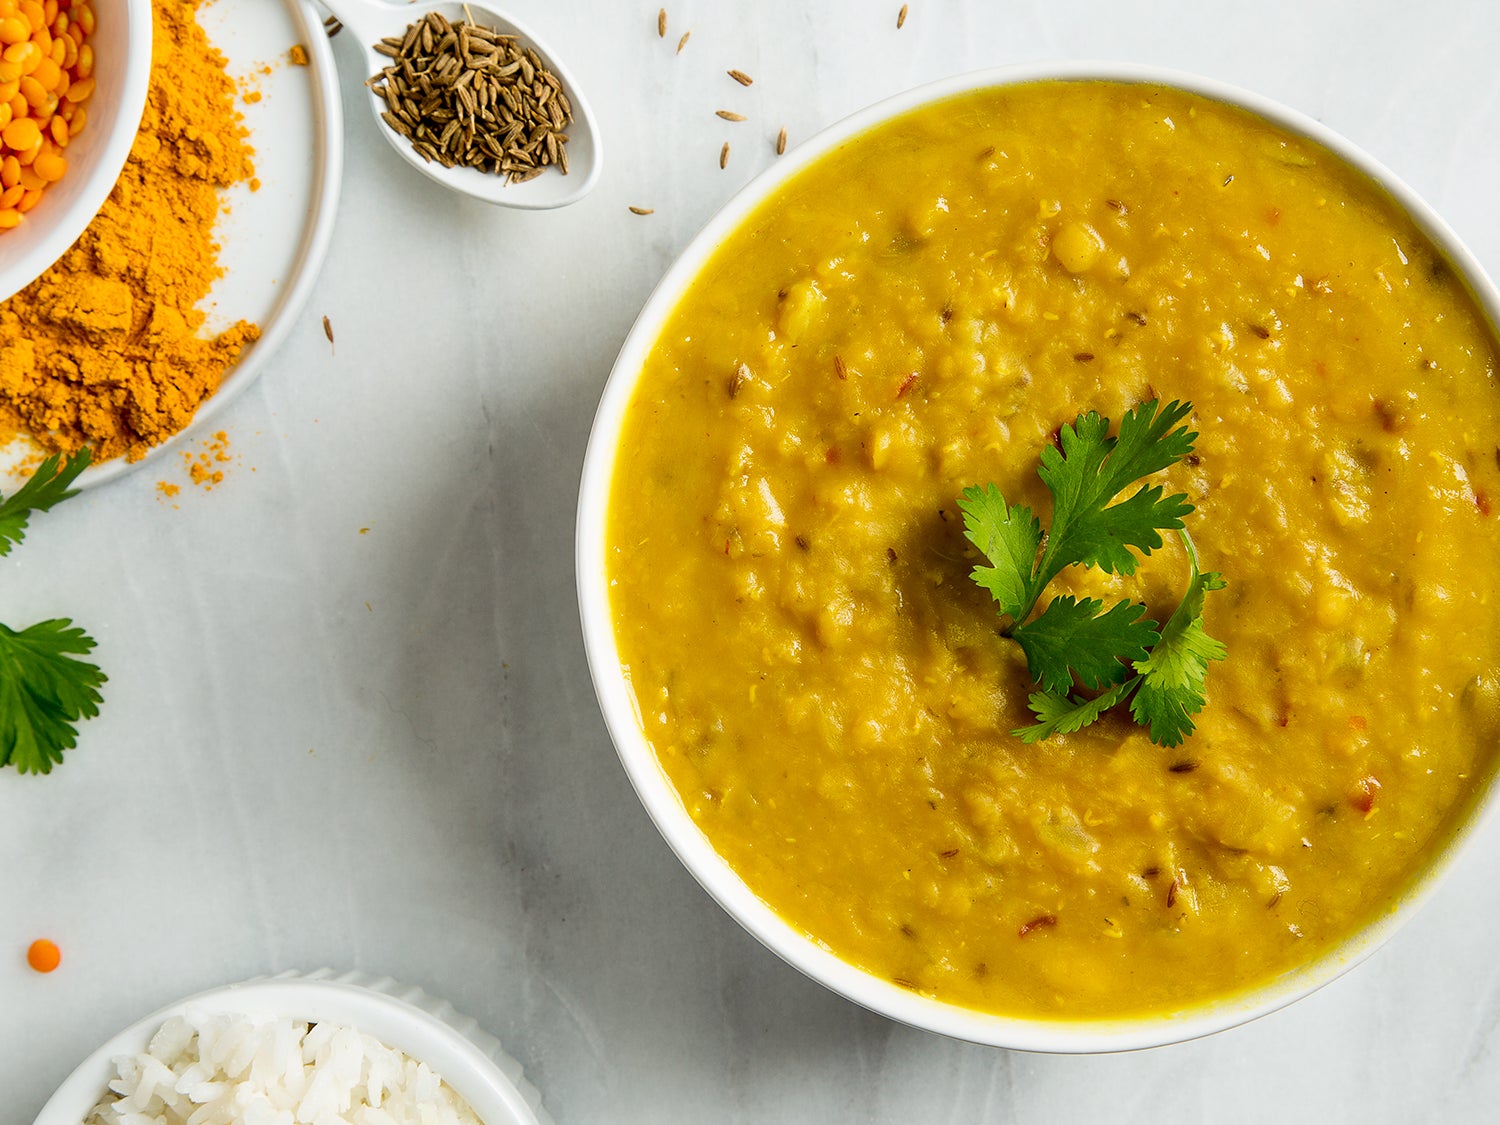 Indian Cooking 101: Different Types of Indian Dals (Legumes